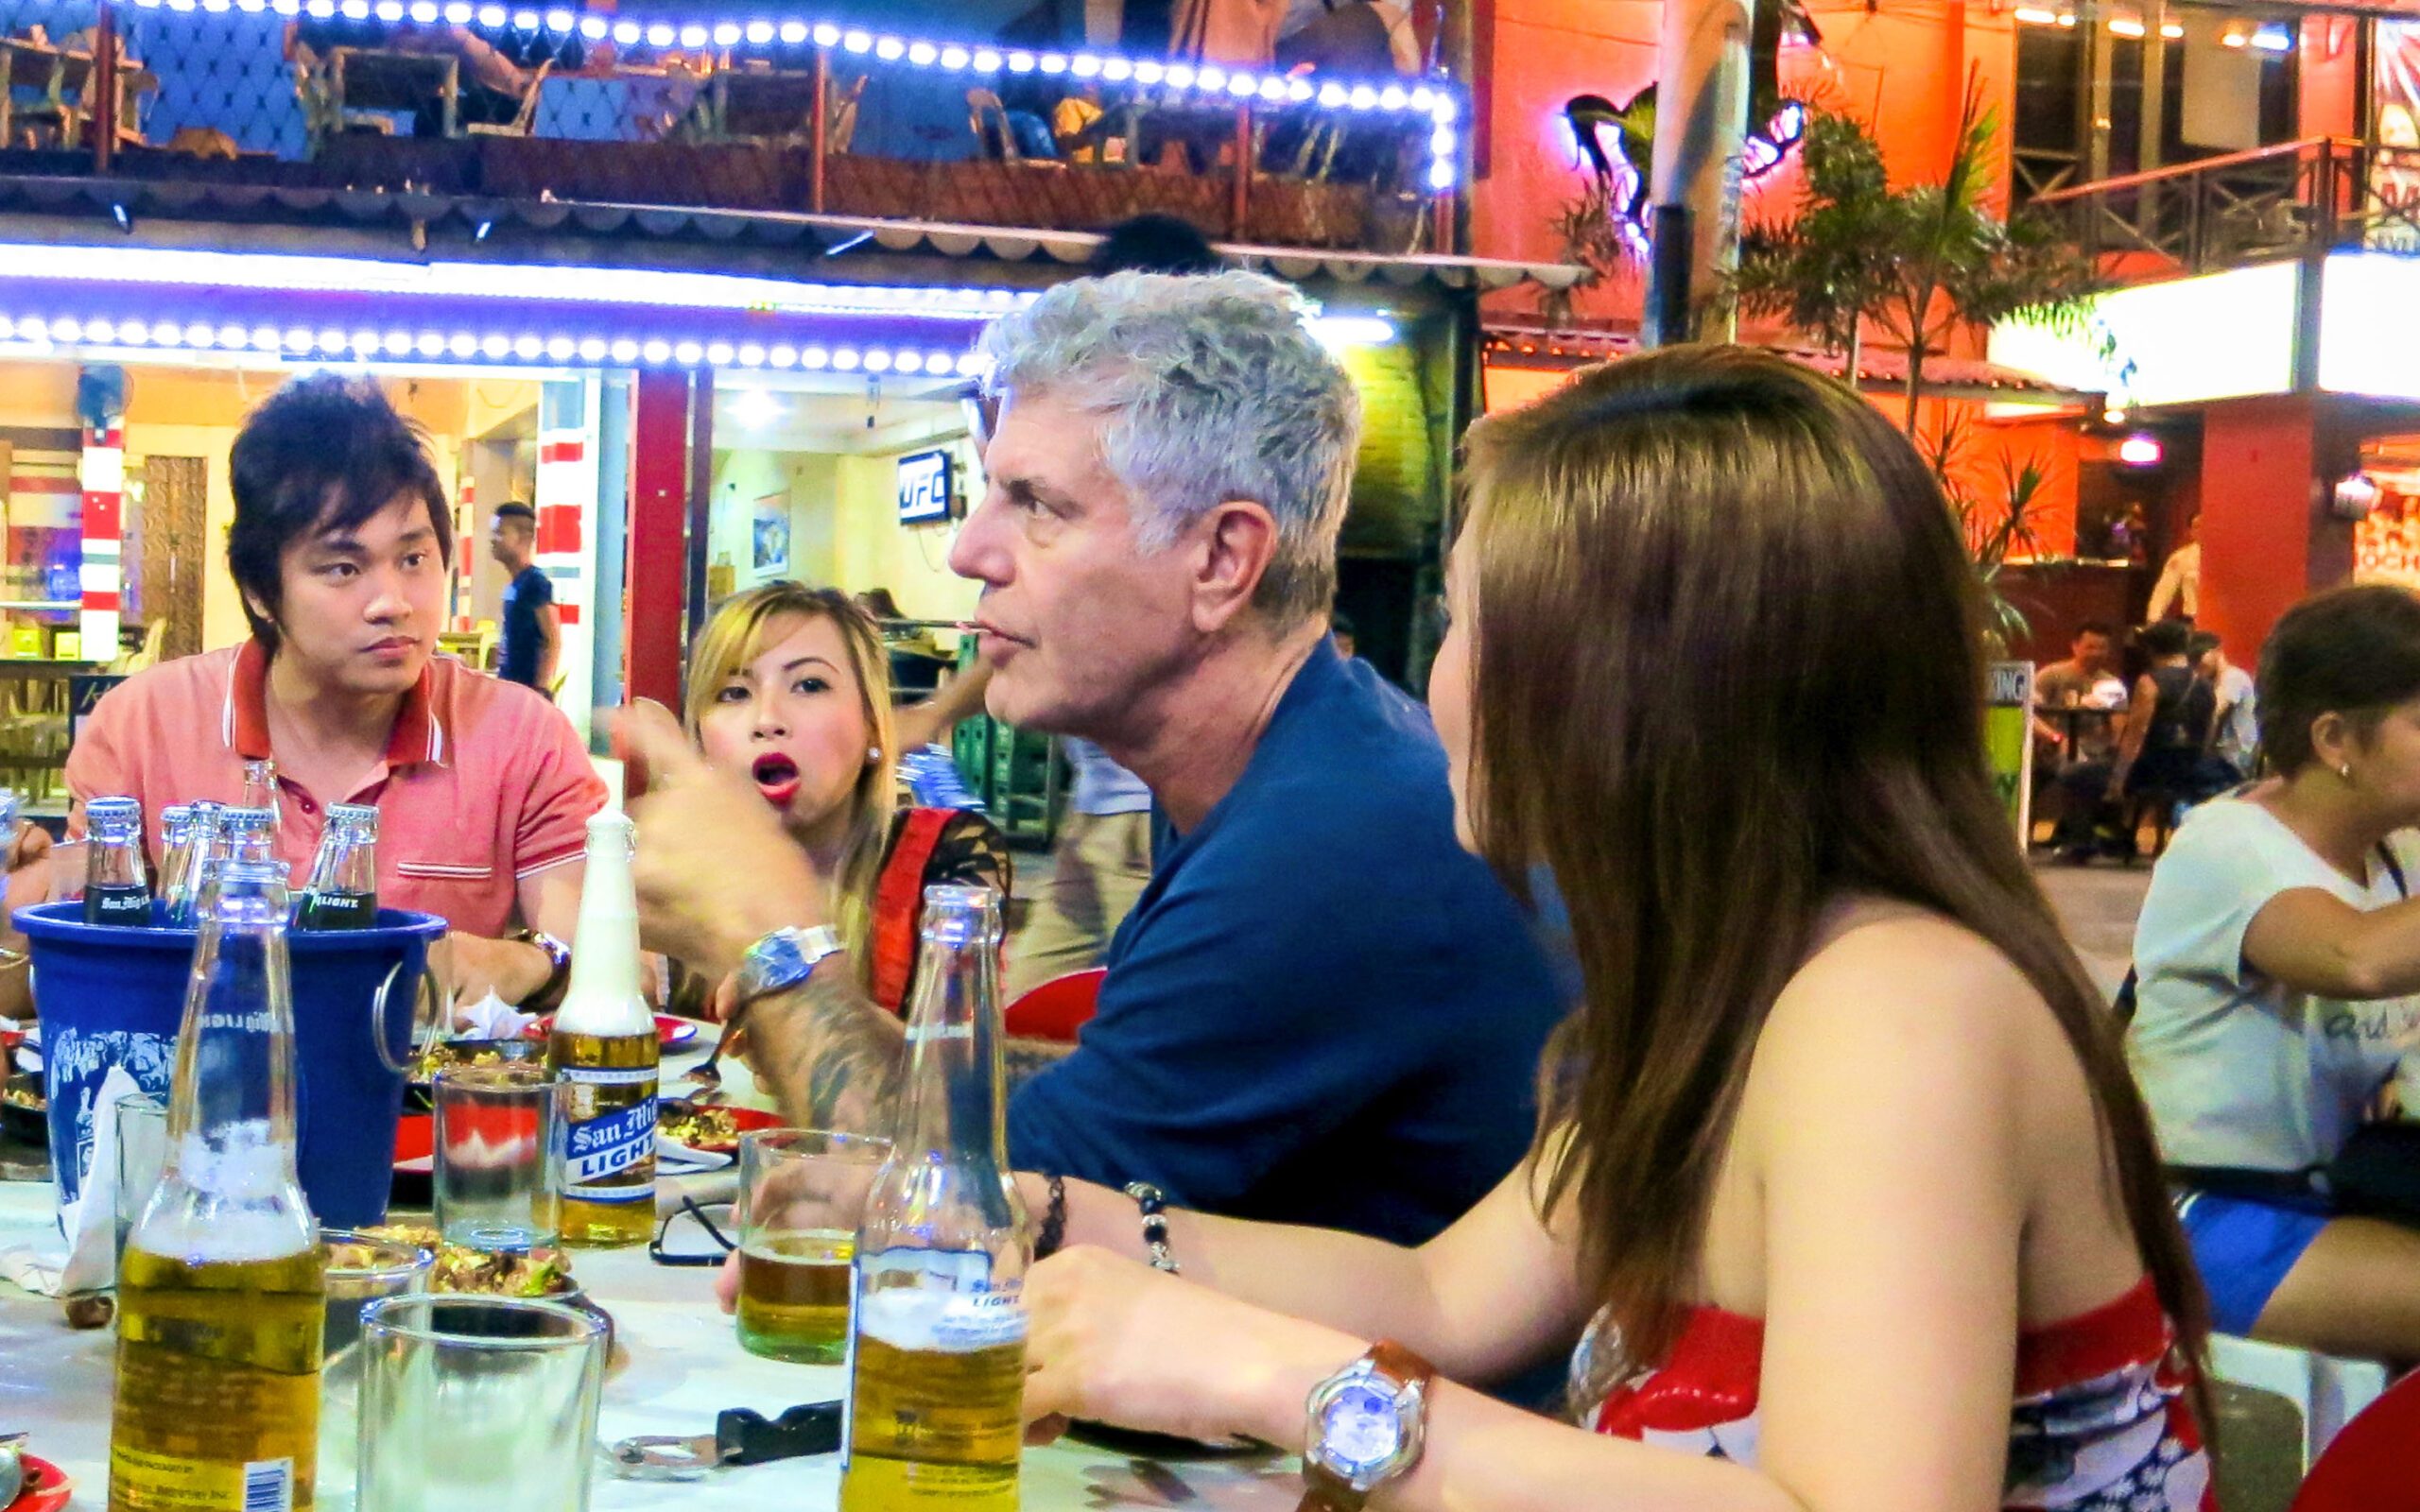 Anthony Bourdain shares experiences of Filipino culture